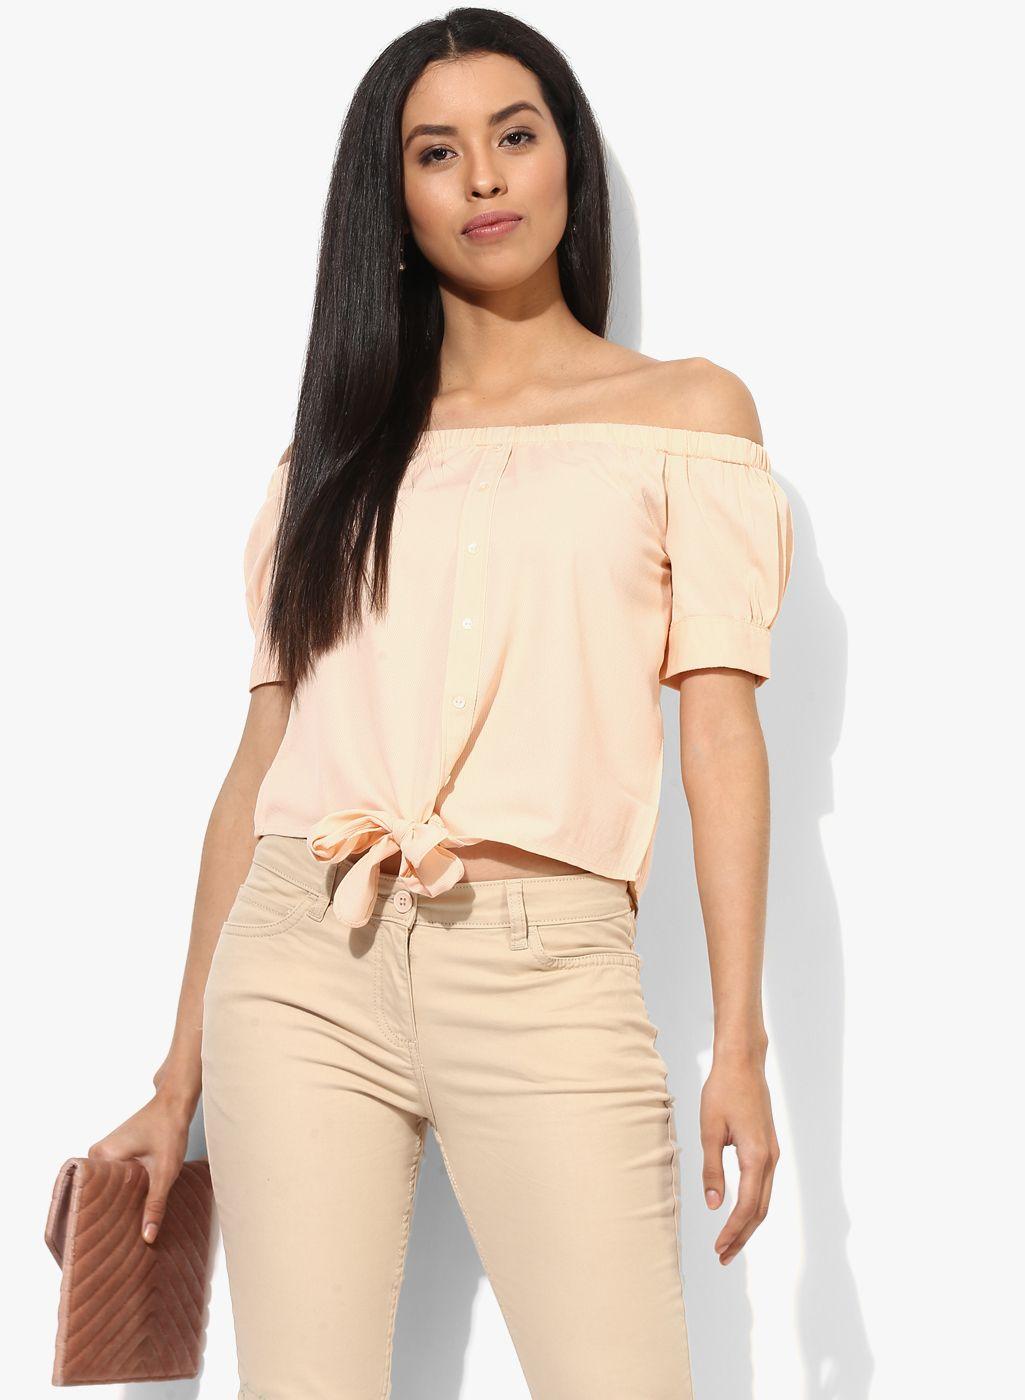 honey by pantaloons women peach-coloured printed top